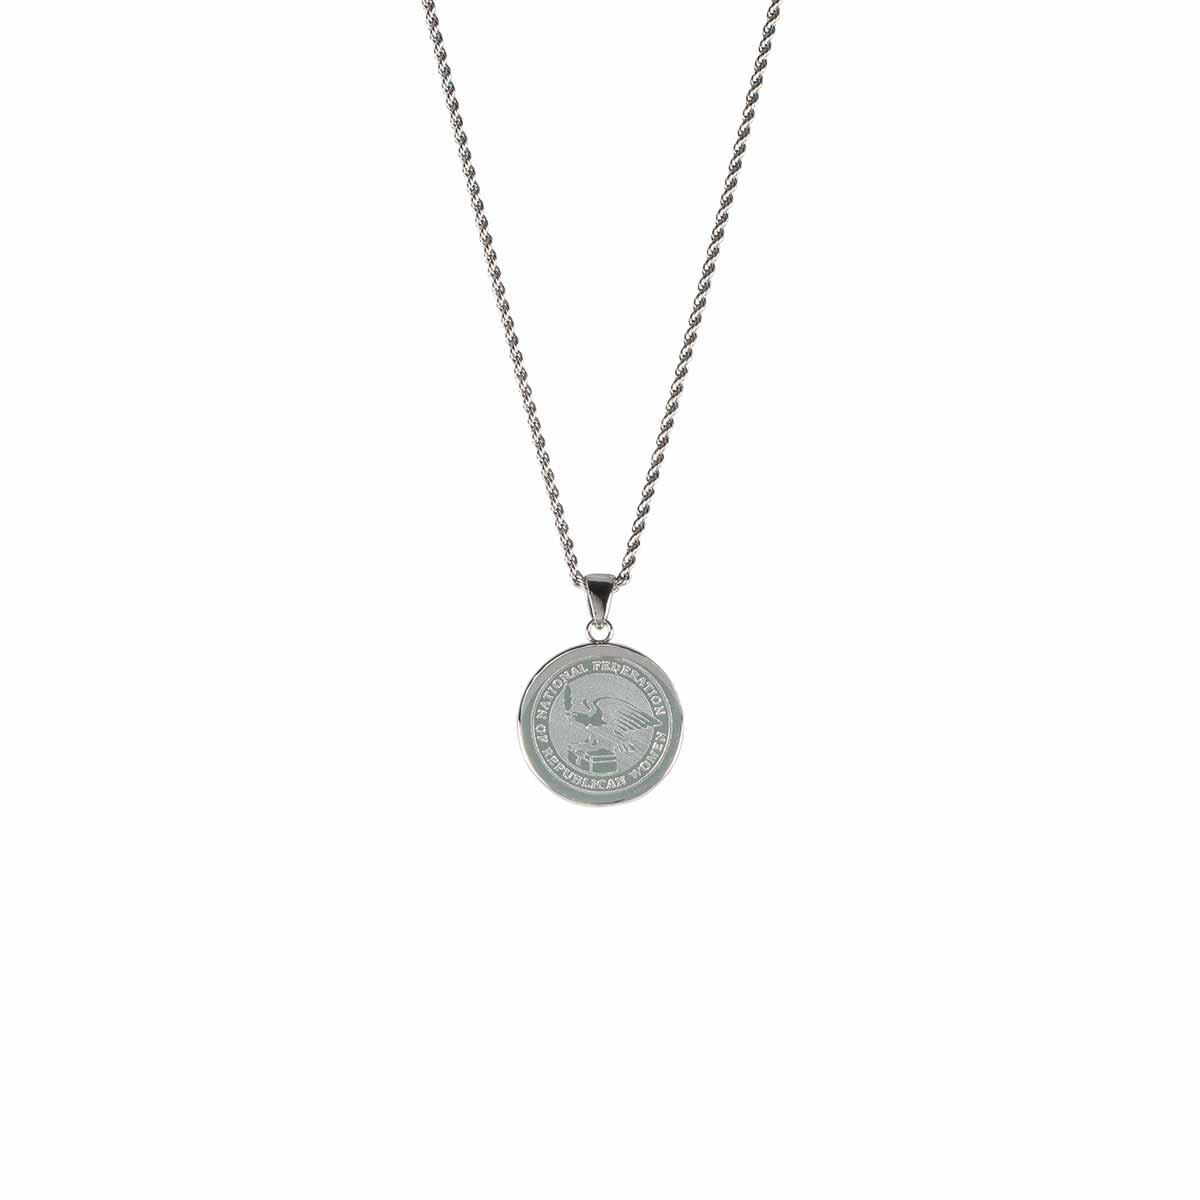 NFRW Logo Engraved Necklace Silver